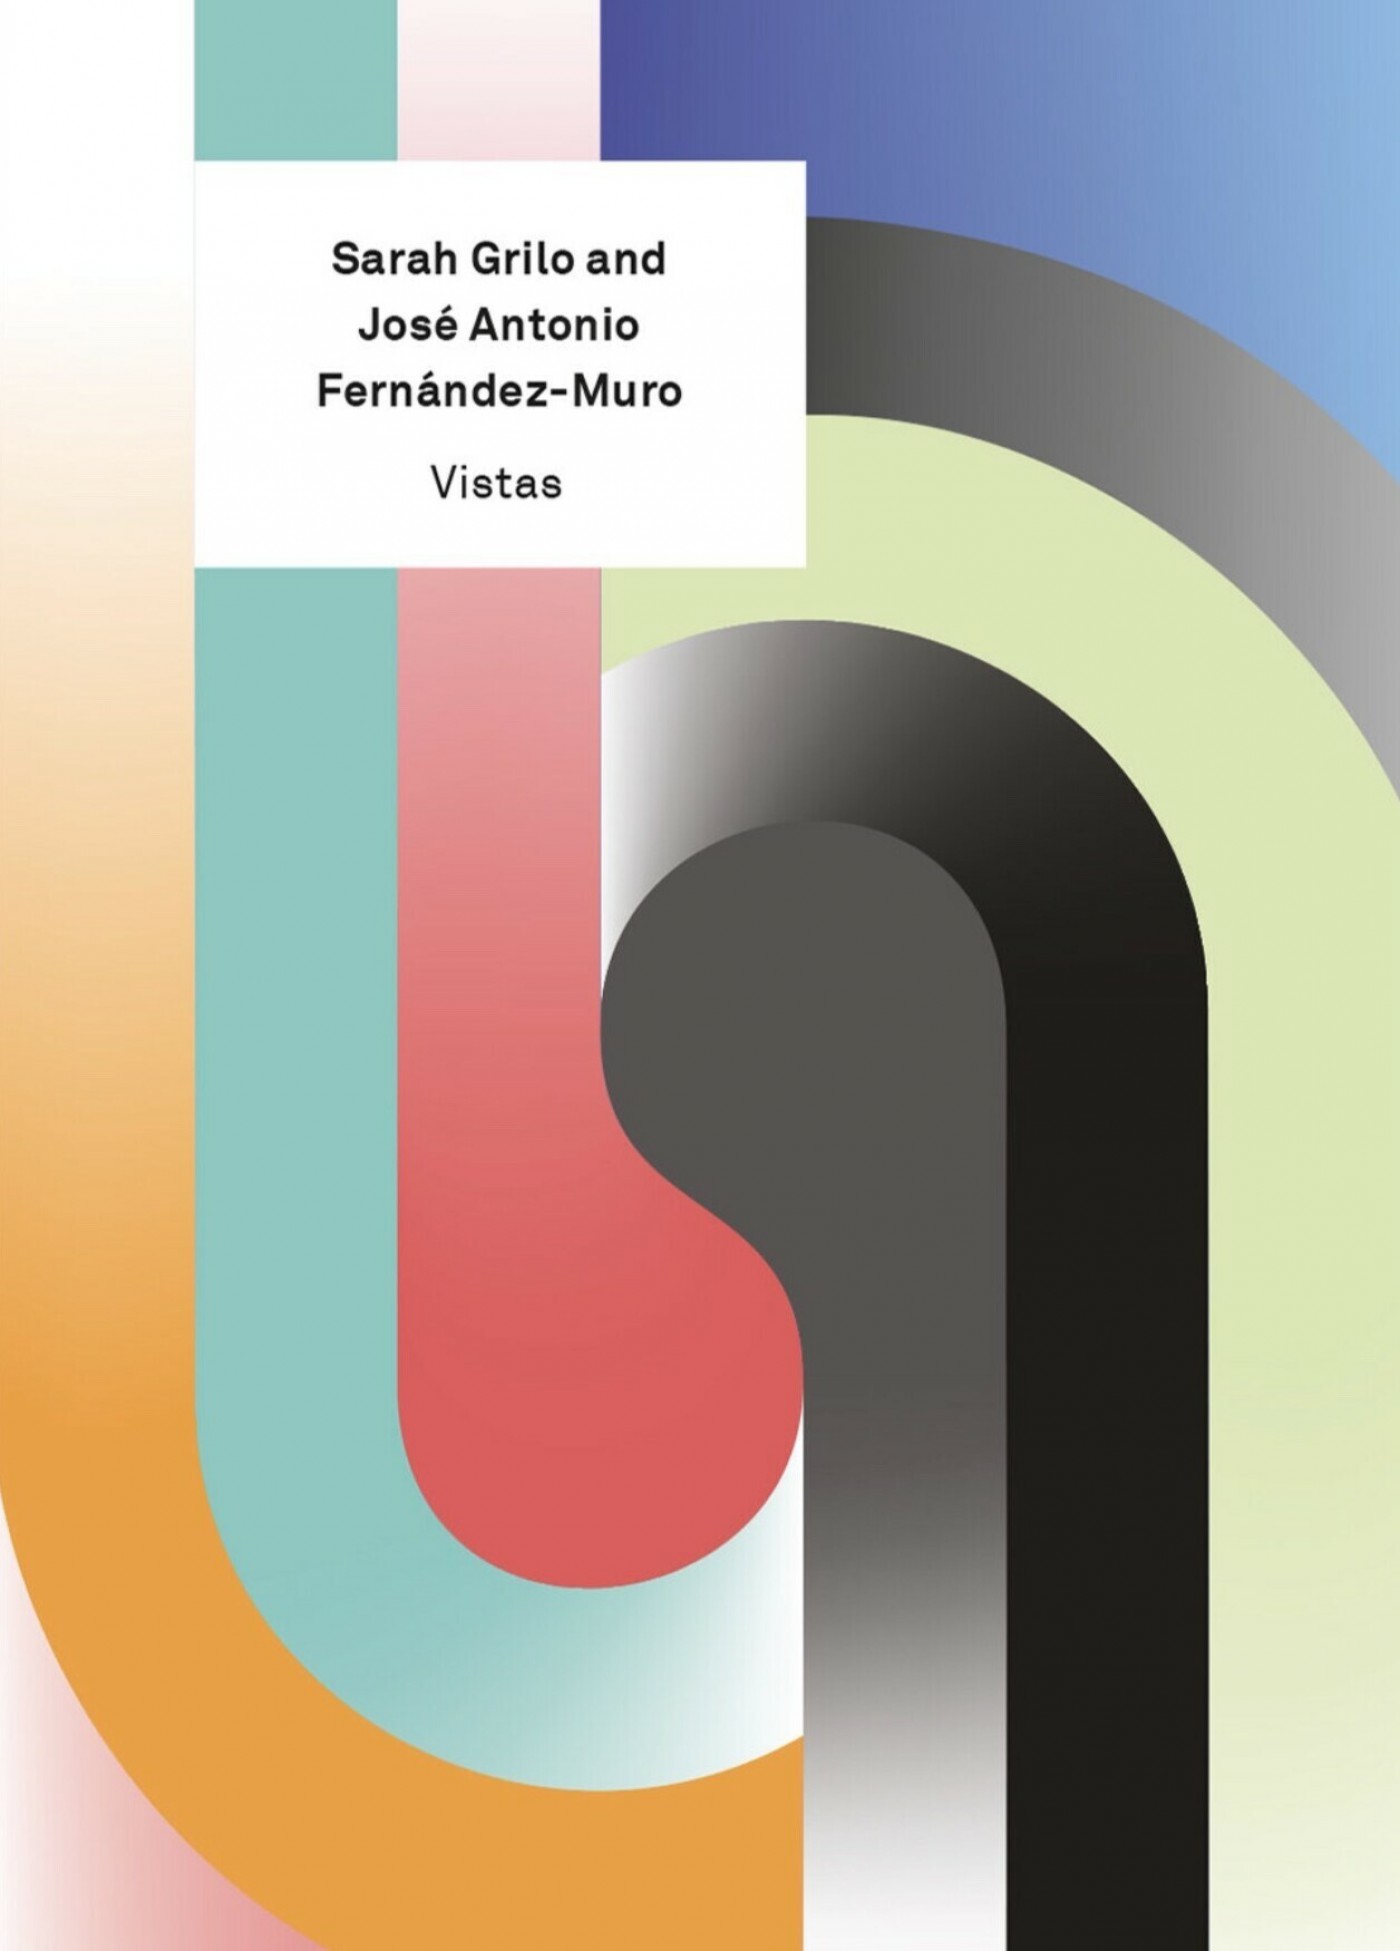 Cover for symposium publication depicting curved abstract shapes in gradients of colors.